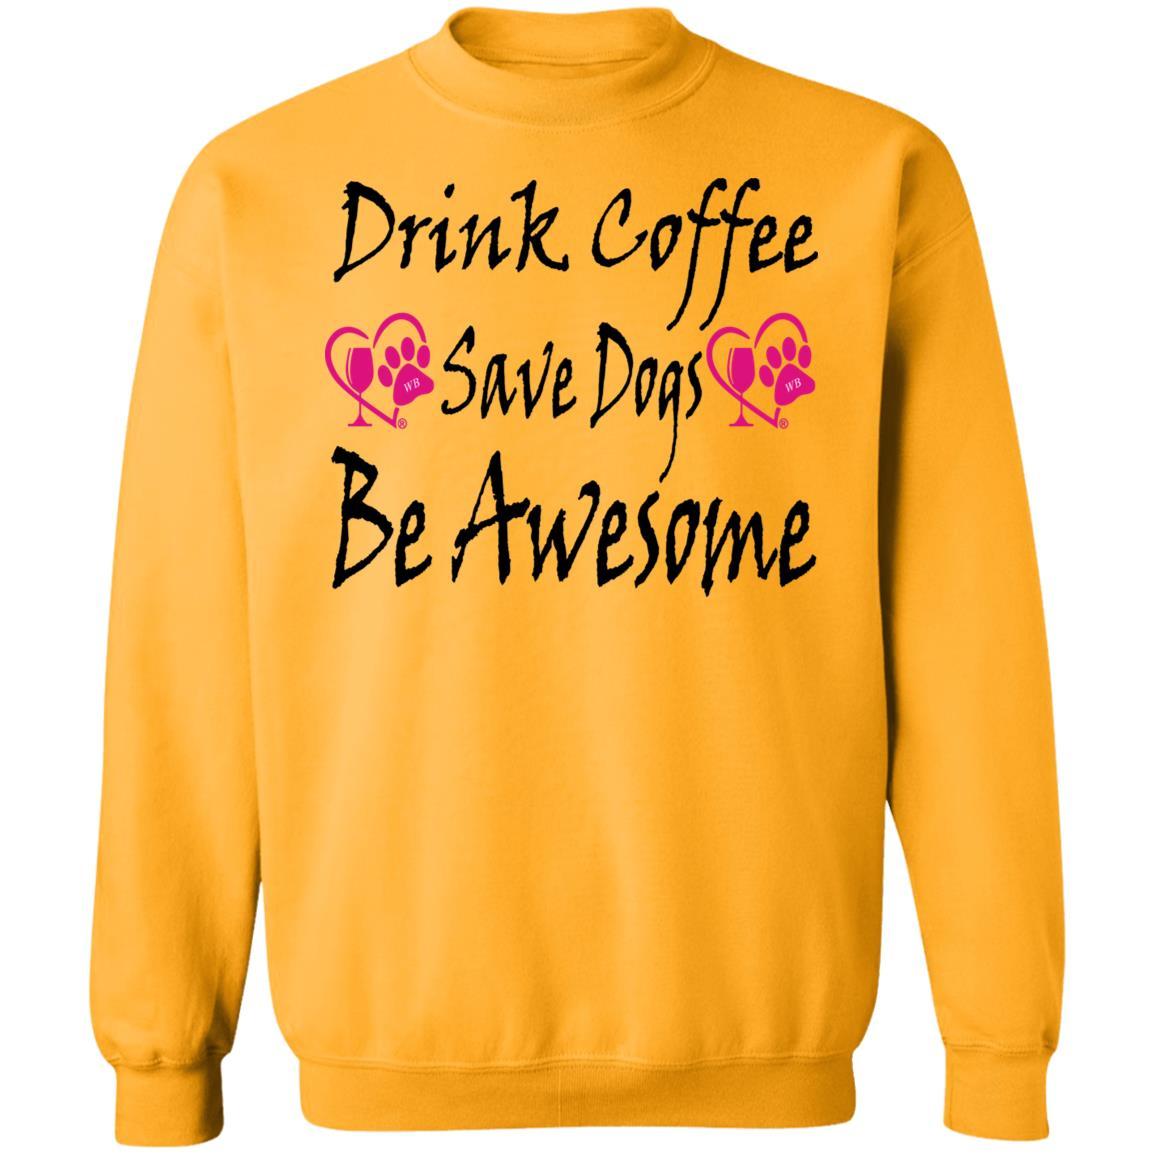 Sweatshirts Gold / S Winey Bitches Co "Drink Coffee Save Dogs Be Awesome" Crewneck Pullover Sweatshirt  8 oz. WineyBitchesCo